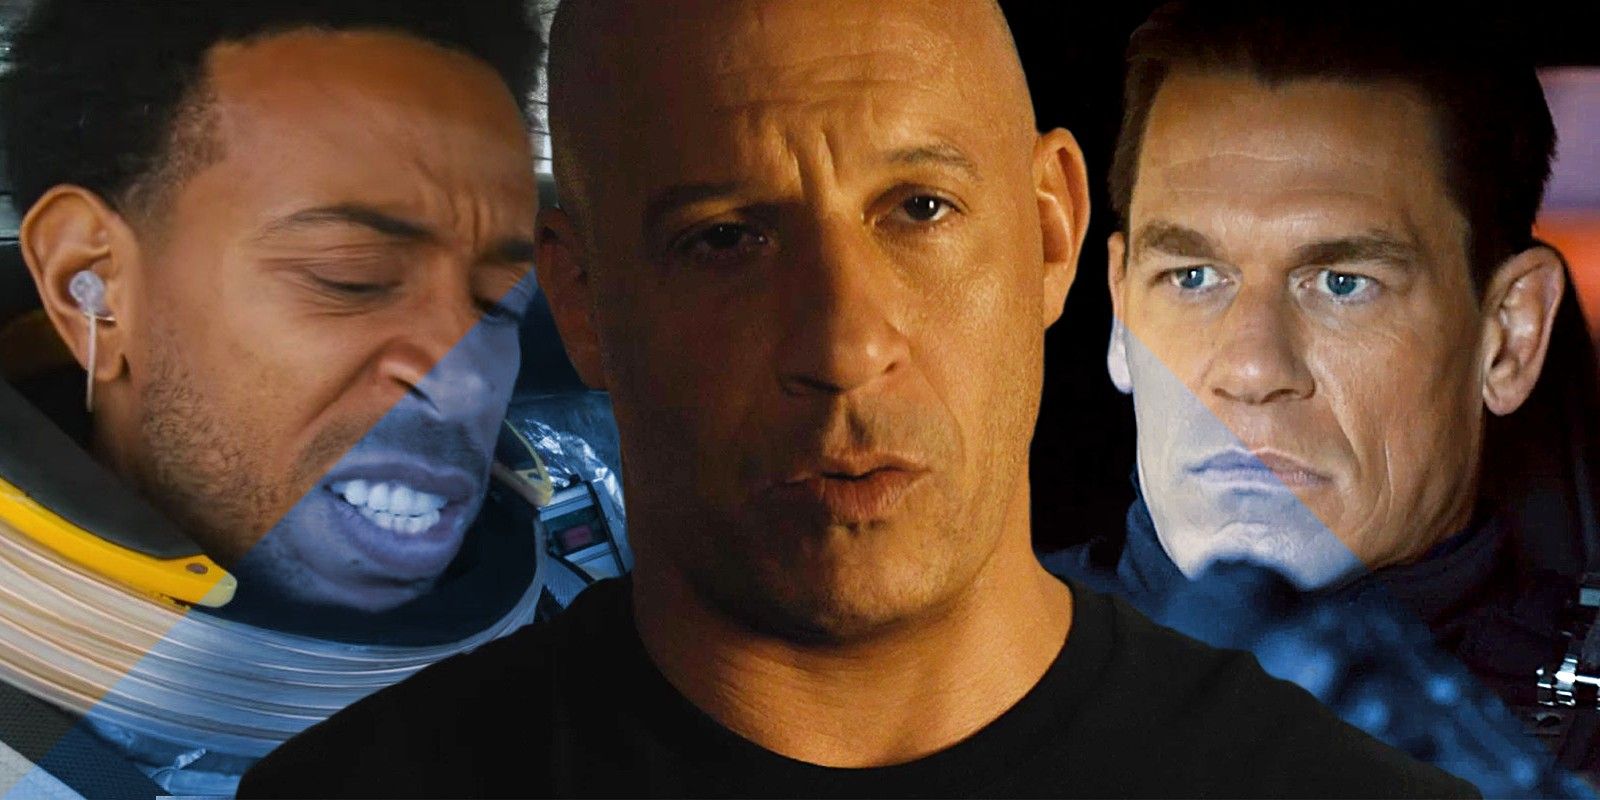 Collage of Ludacris, Vin Diesel (Dom Toretto), and John Cena in Fast & Furious 9